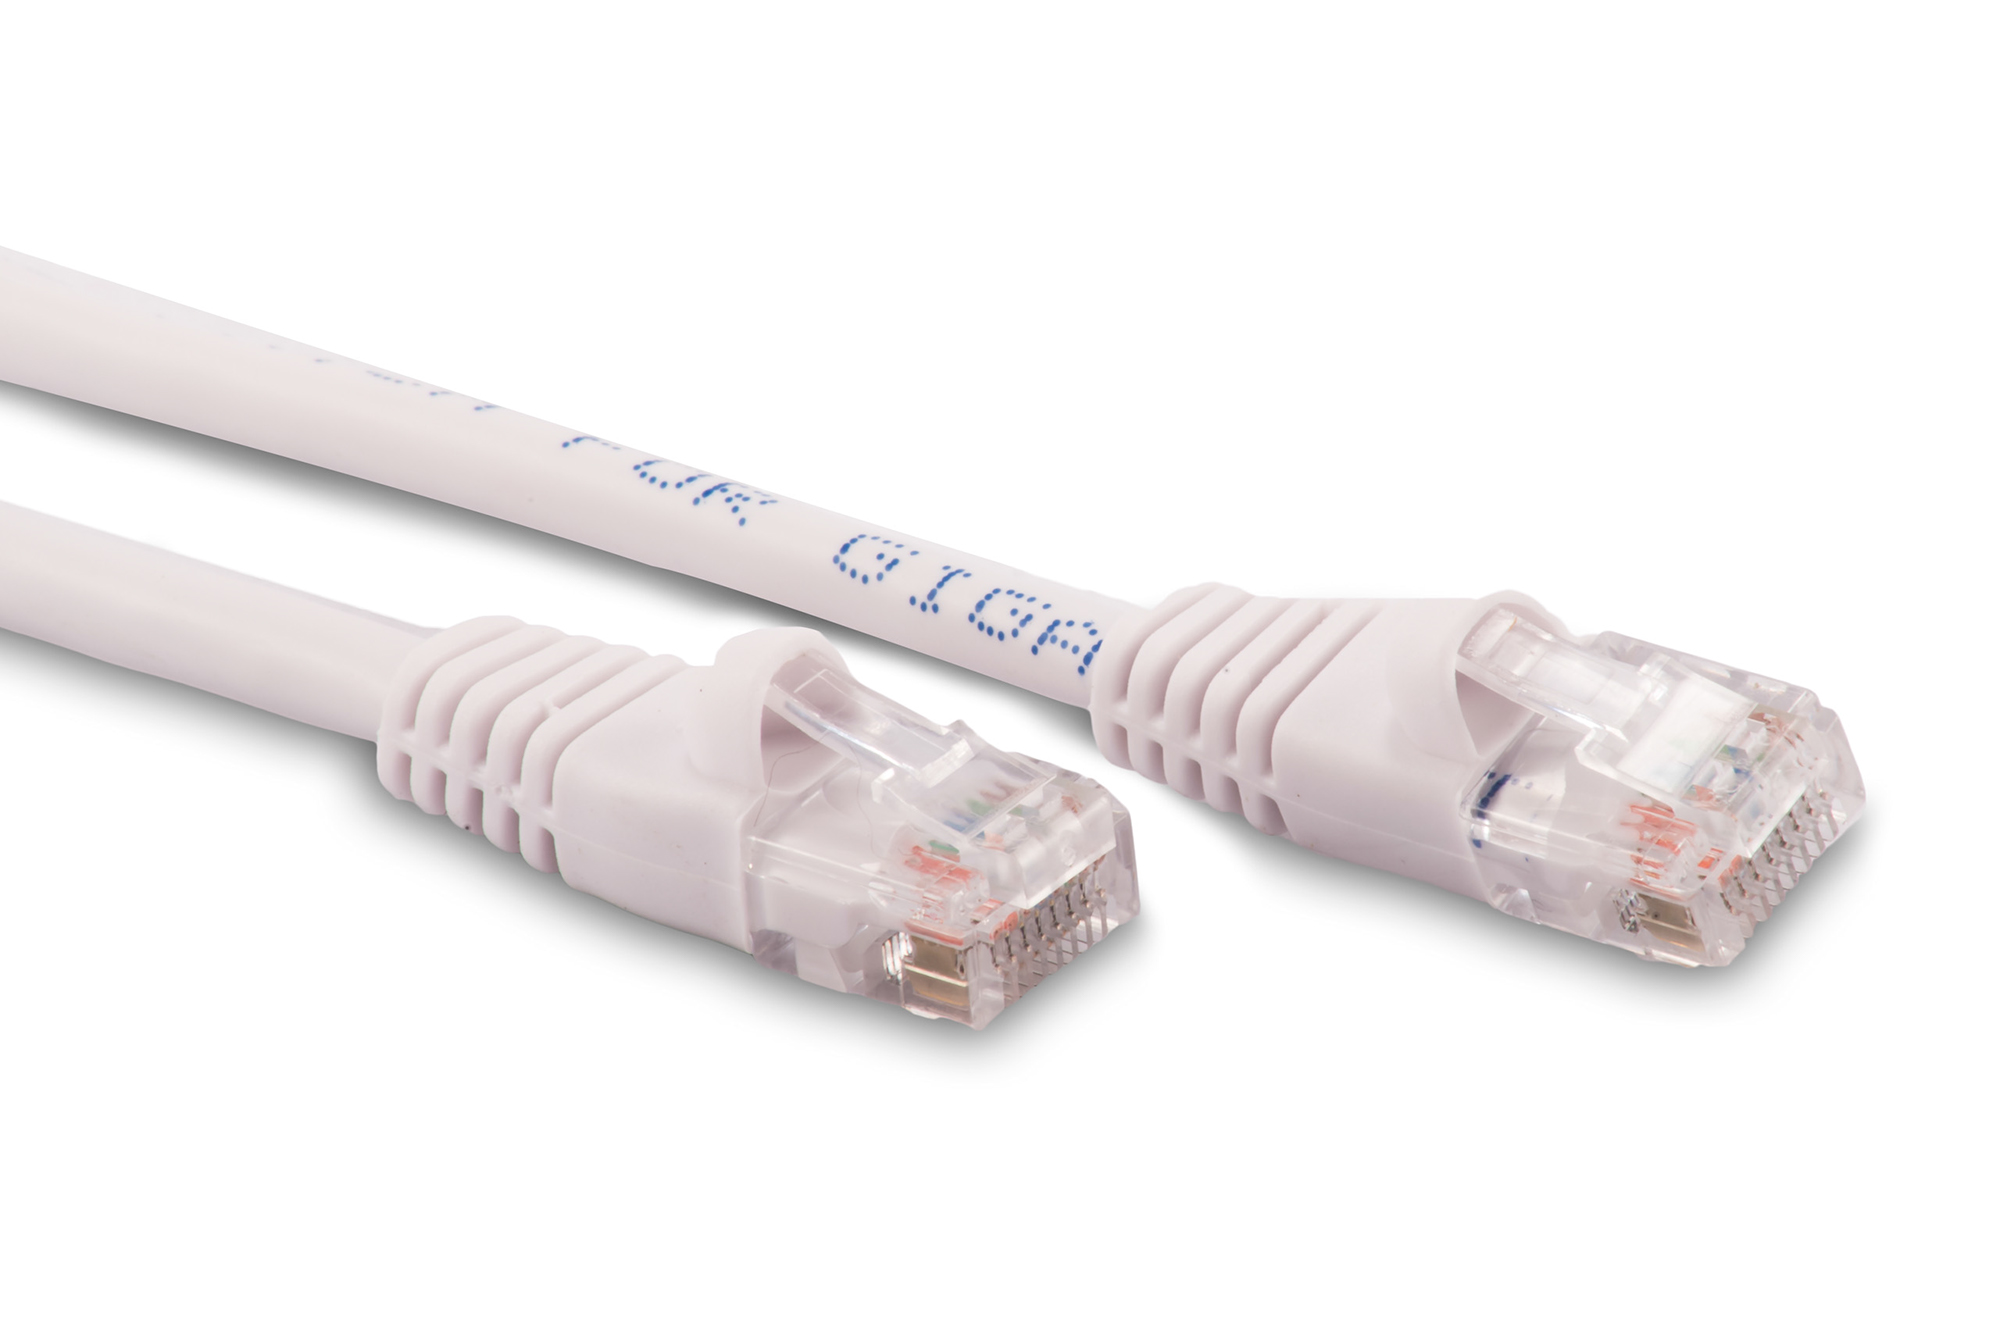 10ft Cat5e Ethernet Patch Cable - White Color - Snagless Boot, Stranded, RJ45, 350Mhz, 24AWG